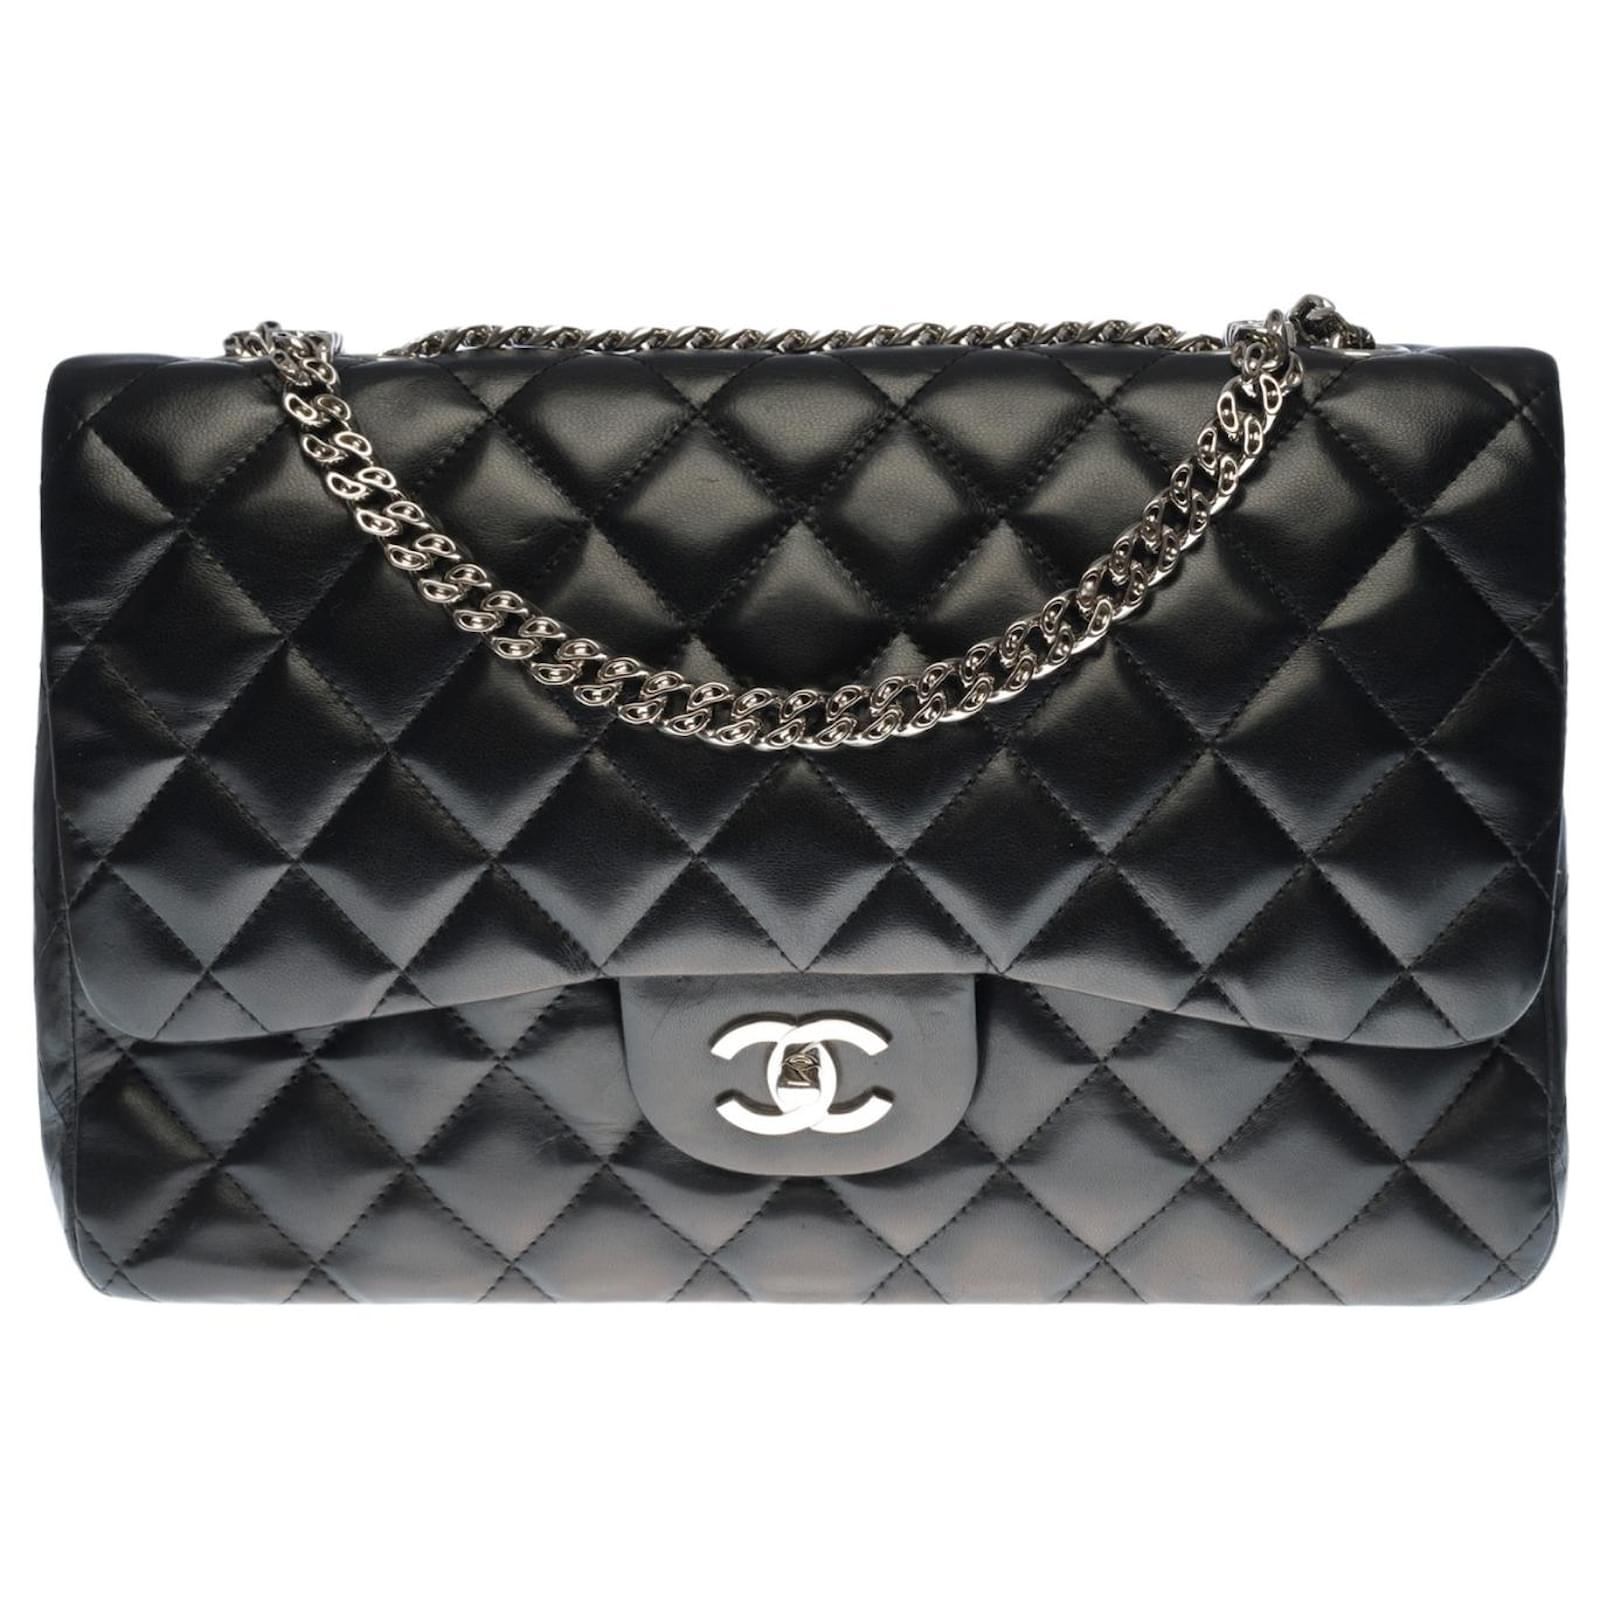 Rare & Exceptional Chanel Timeless Jumbo Flap bag from the Bijoux  collection in black quilted lambskin, Garniture en métal argenté